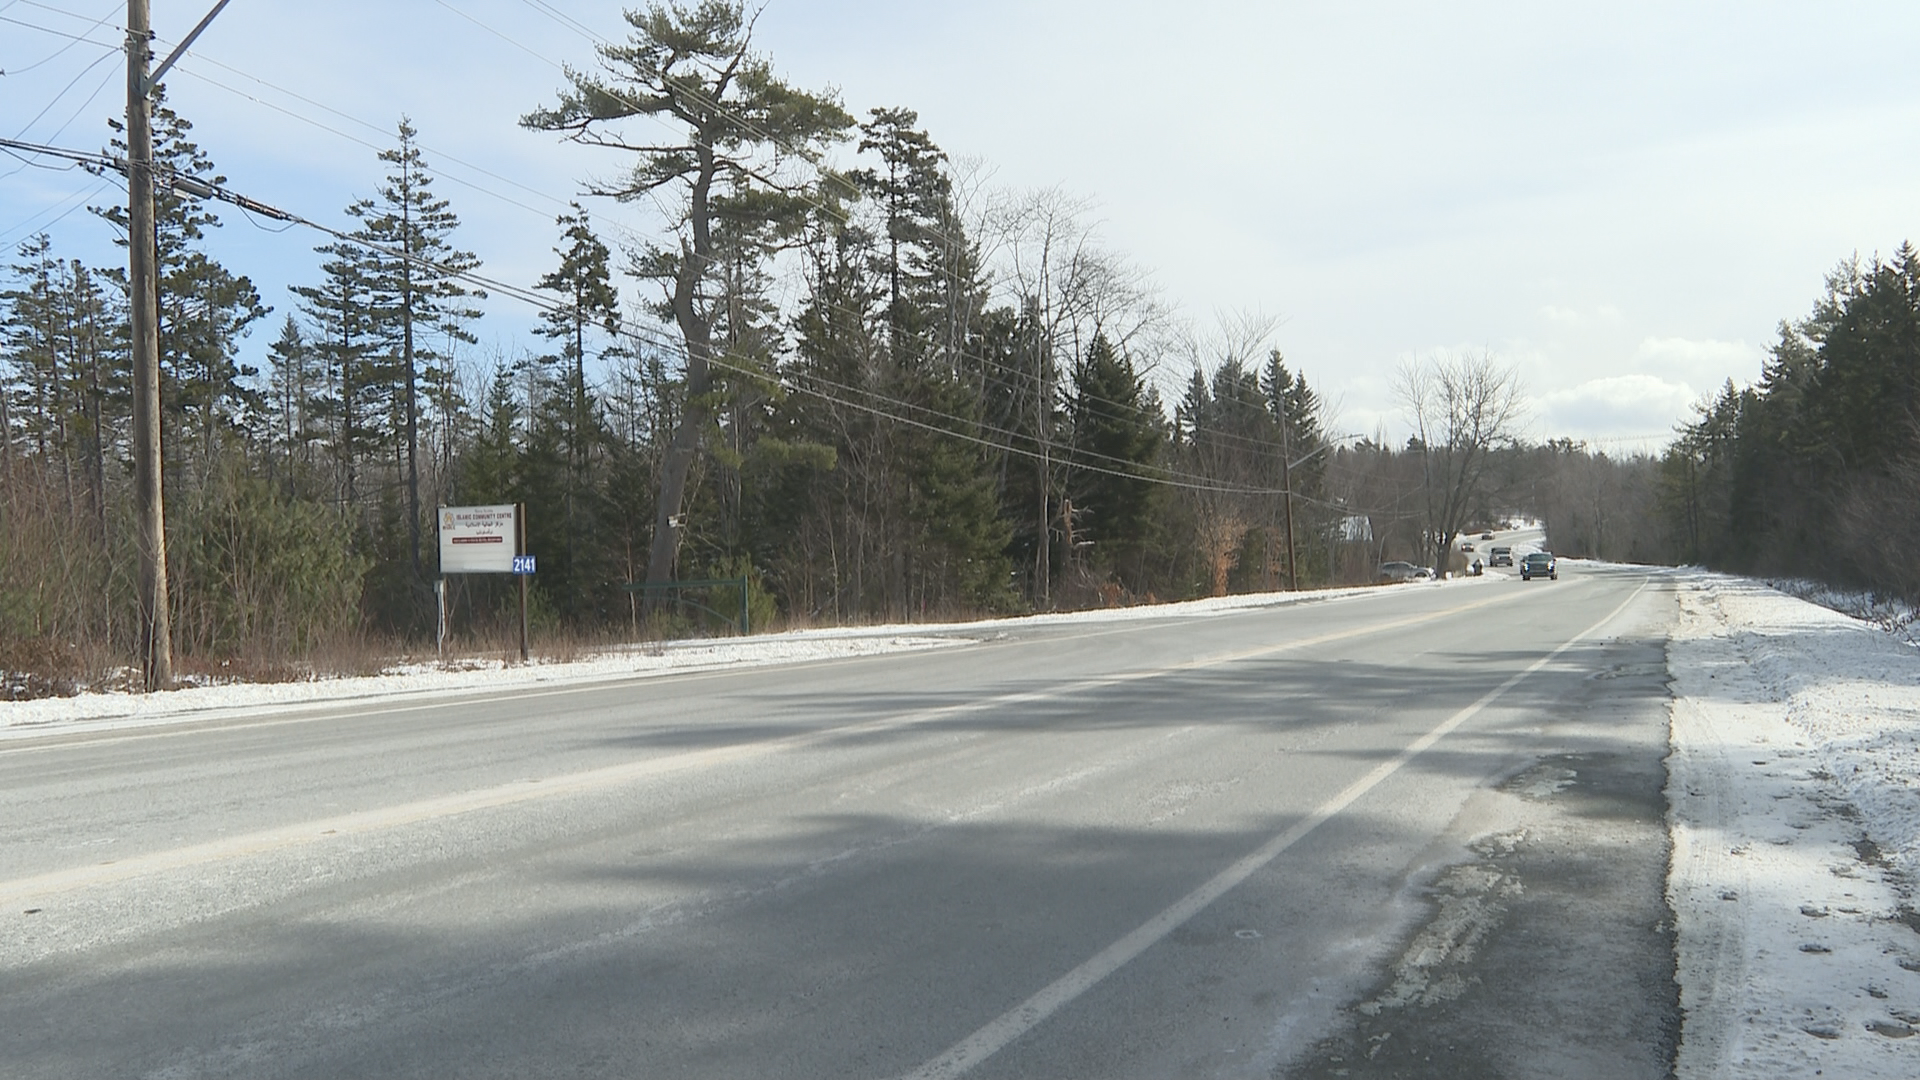 Safety is in question as the NSICC is located along Larry Uteck Blvd., a street without sidewalks or traffic lights for those walking to the centre.